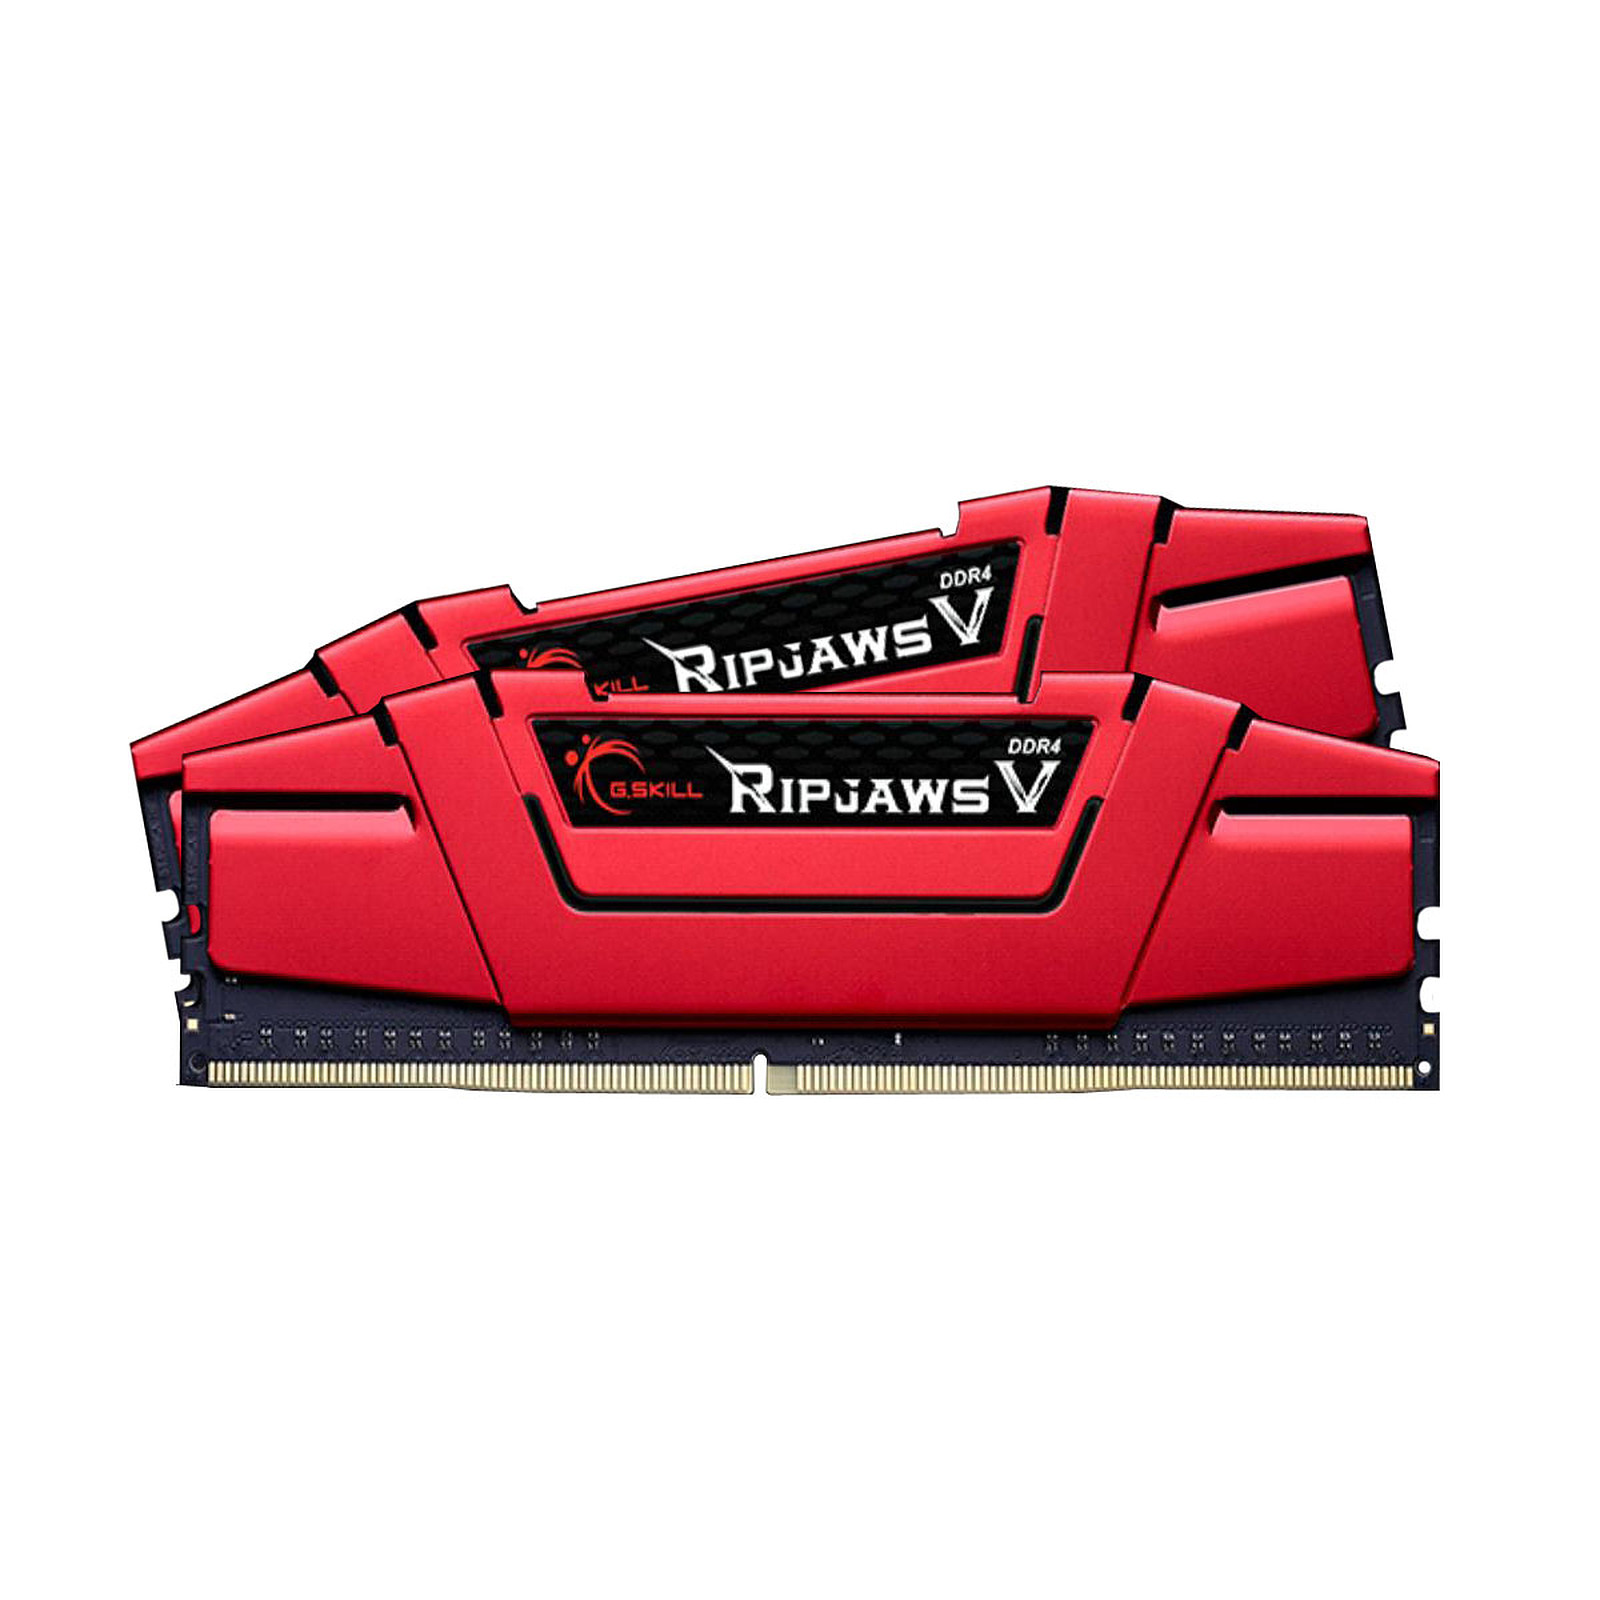 G.Skill RipJaws 5 Series Rouge 16 Go (2x 8 Go) DDR4 2400 MHz CL15 - Memoire PC G.Skill